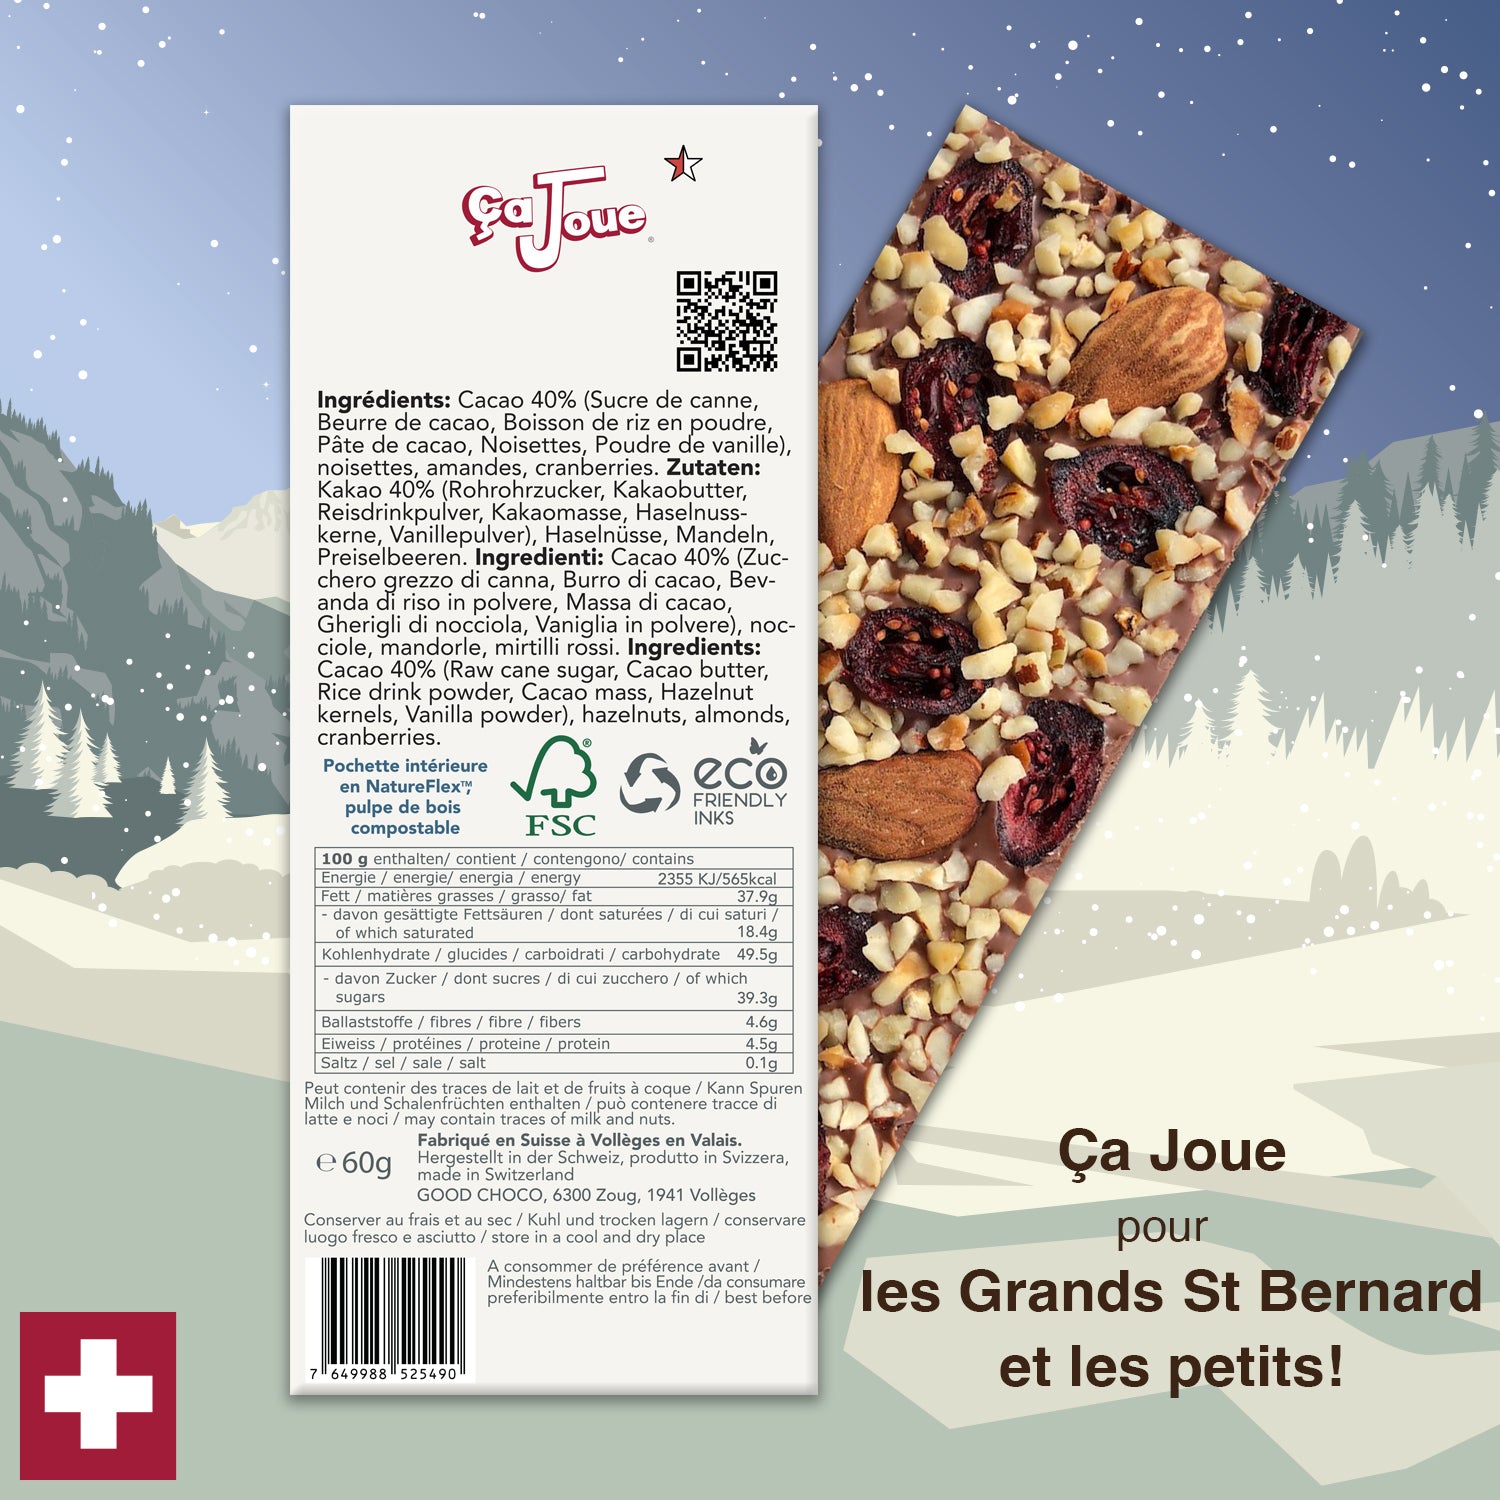 Ça Joue for the for little St Bernards (Ref-BV5) Chocolate from Val de Bagnes